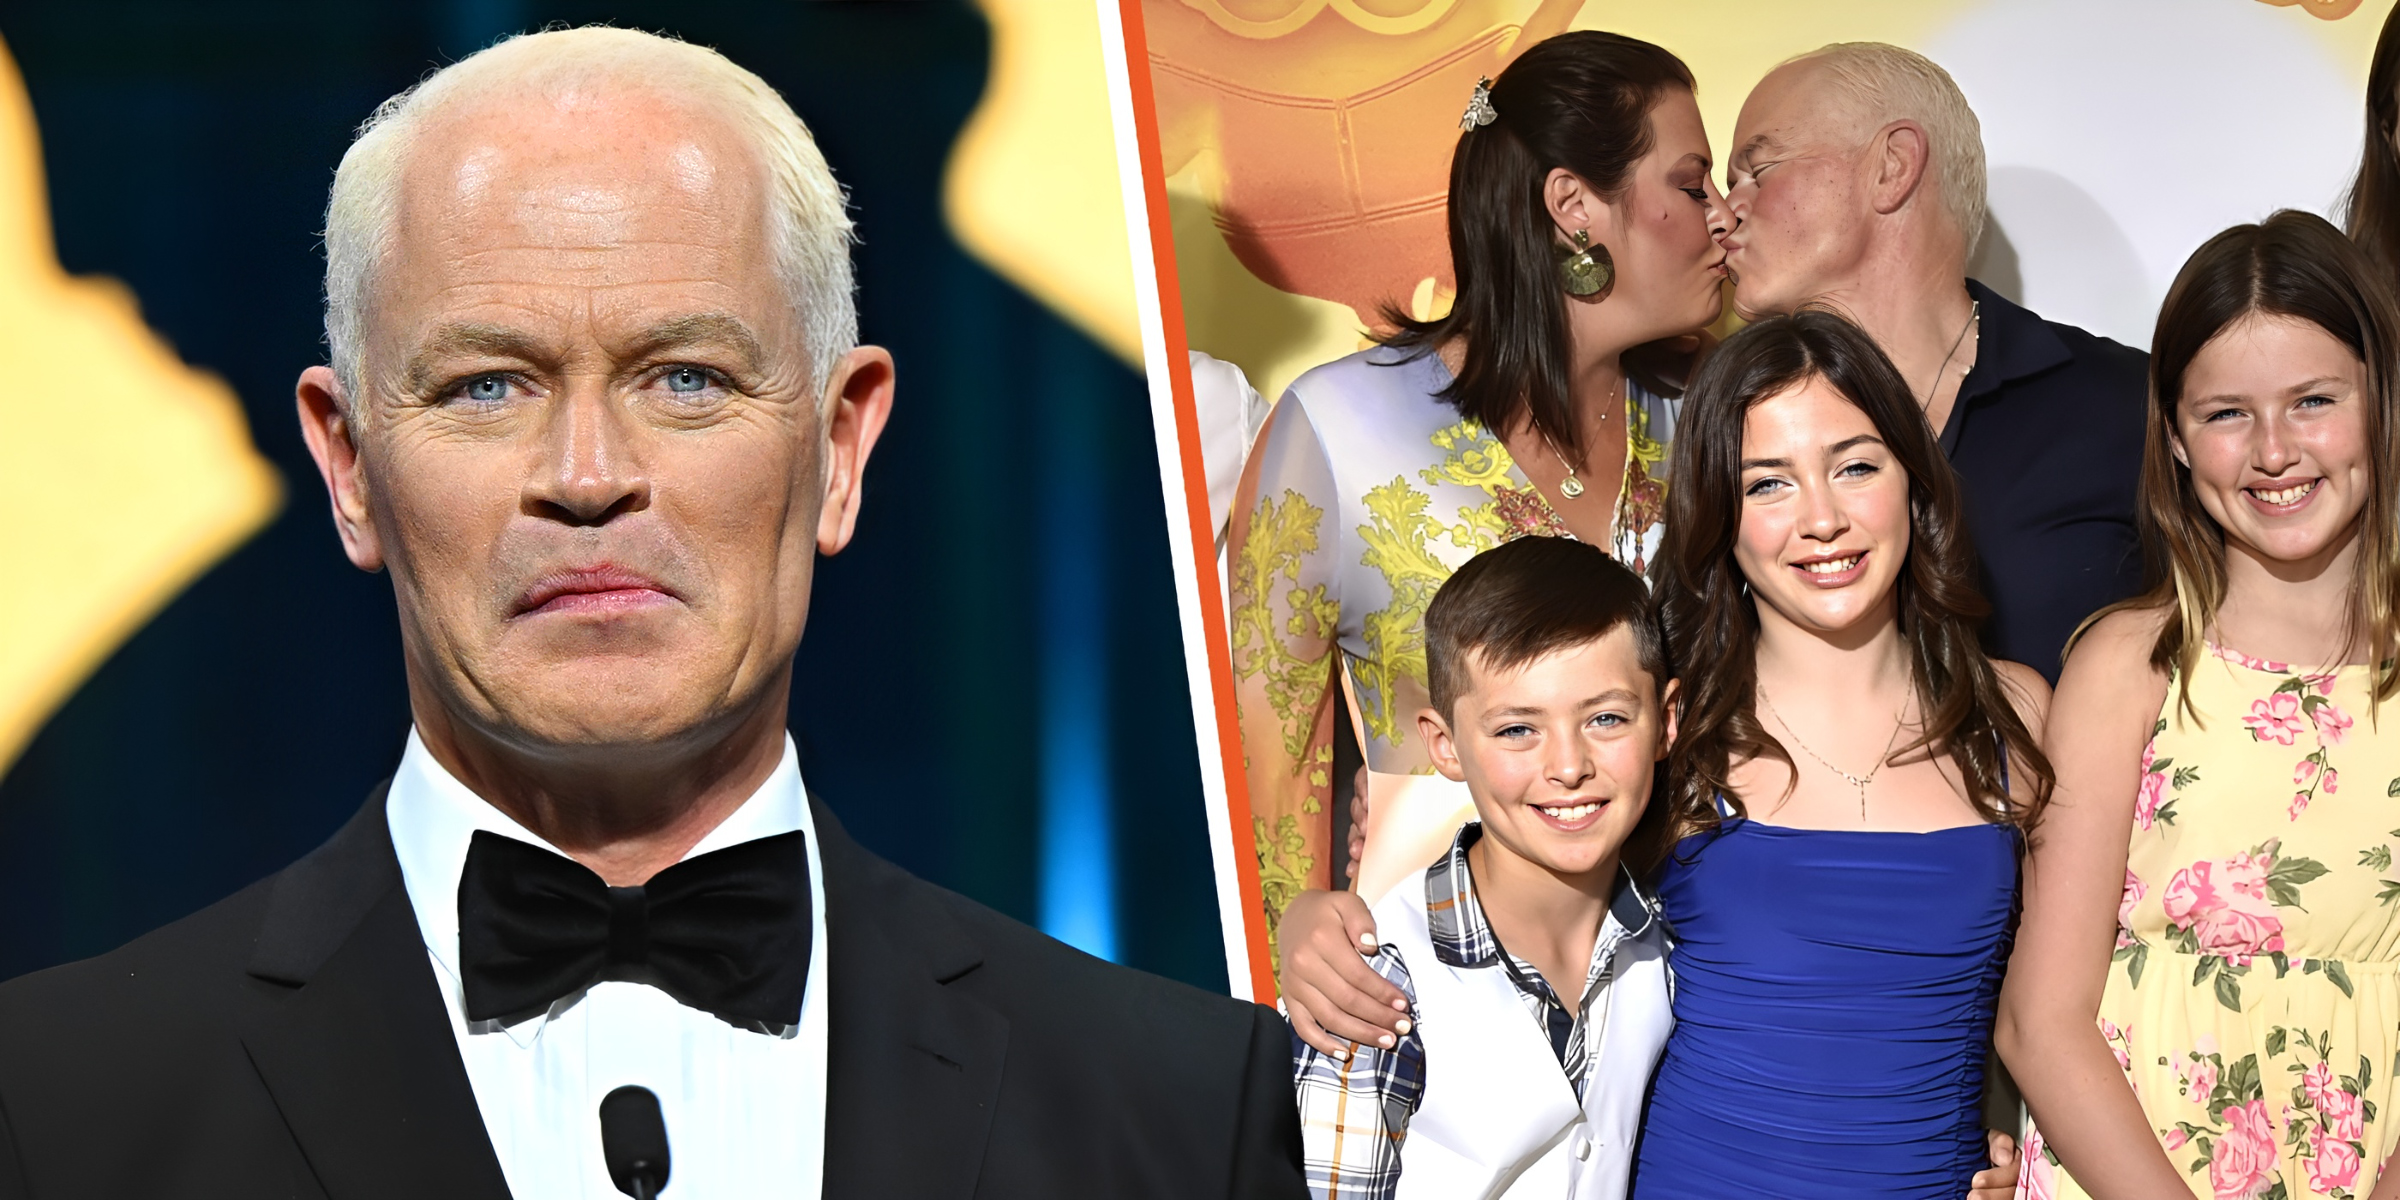 Neal McDonough | Ruve and Neal McDonough with their kids | Source: Getty Images